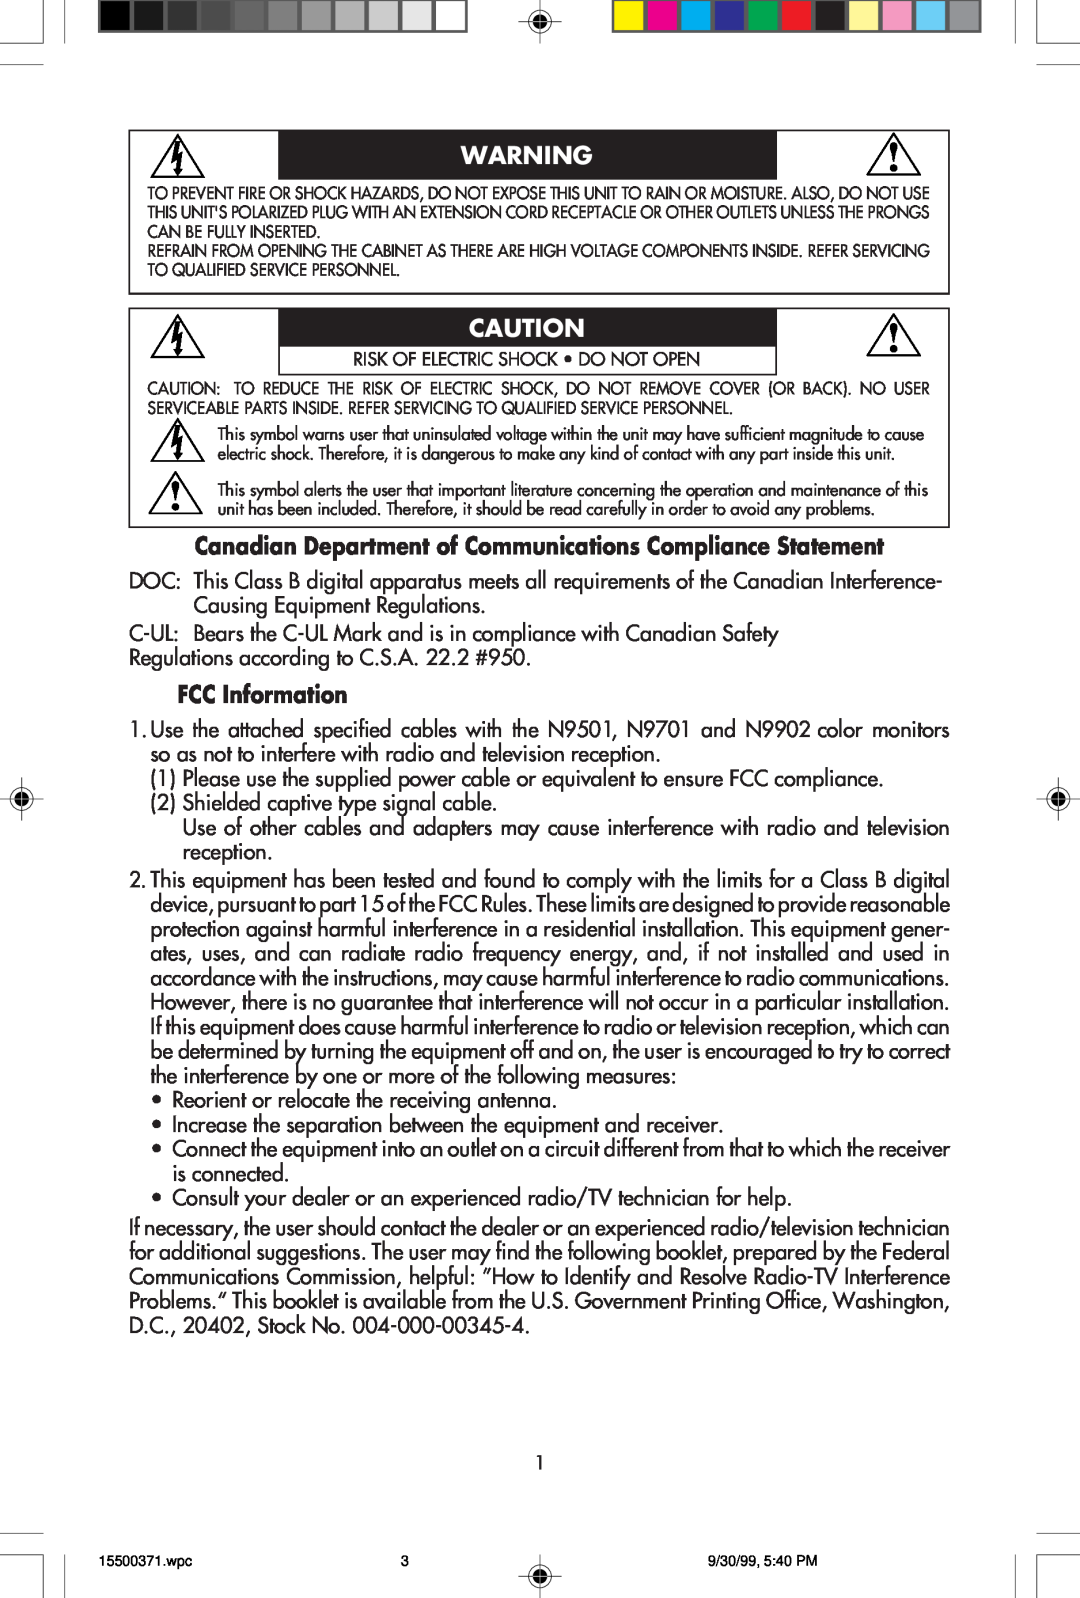 NEC N9701, N9501, N9902 user manual Canadian Department of Communications Compliance Statement, FCC Information 